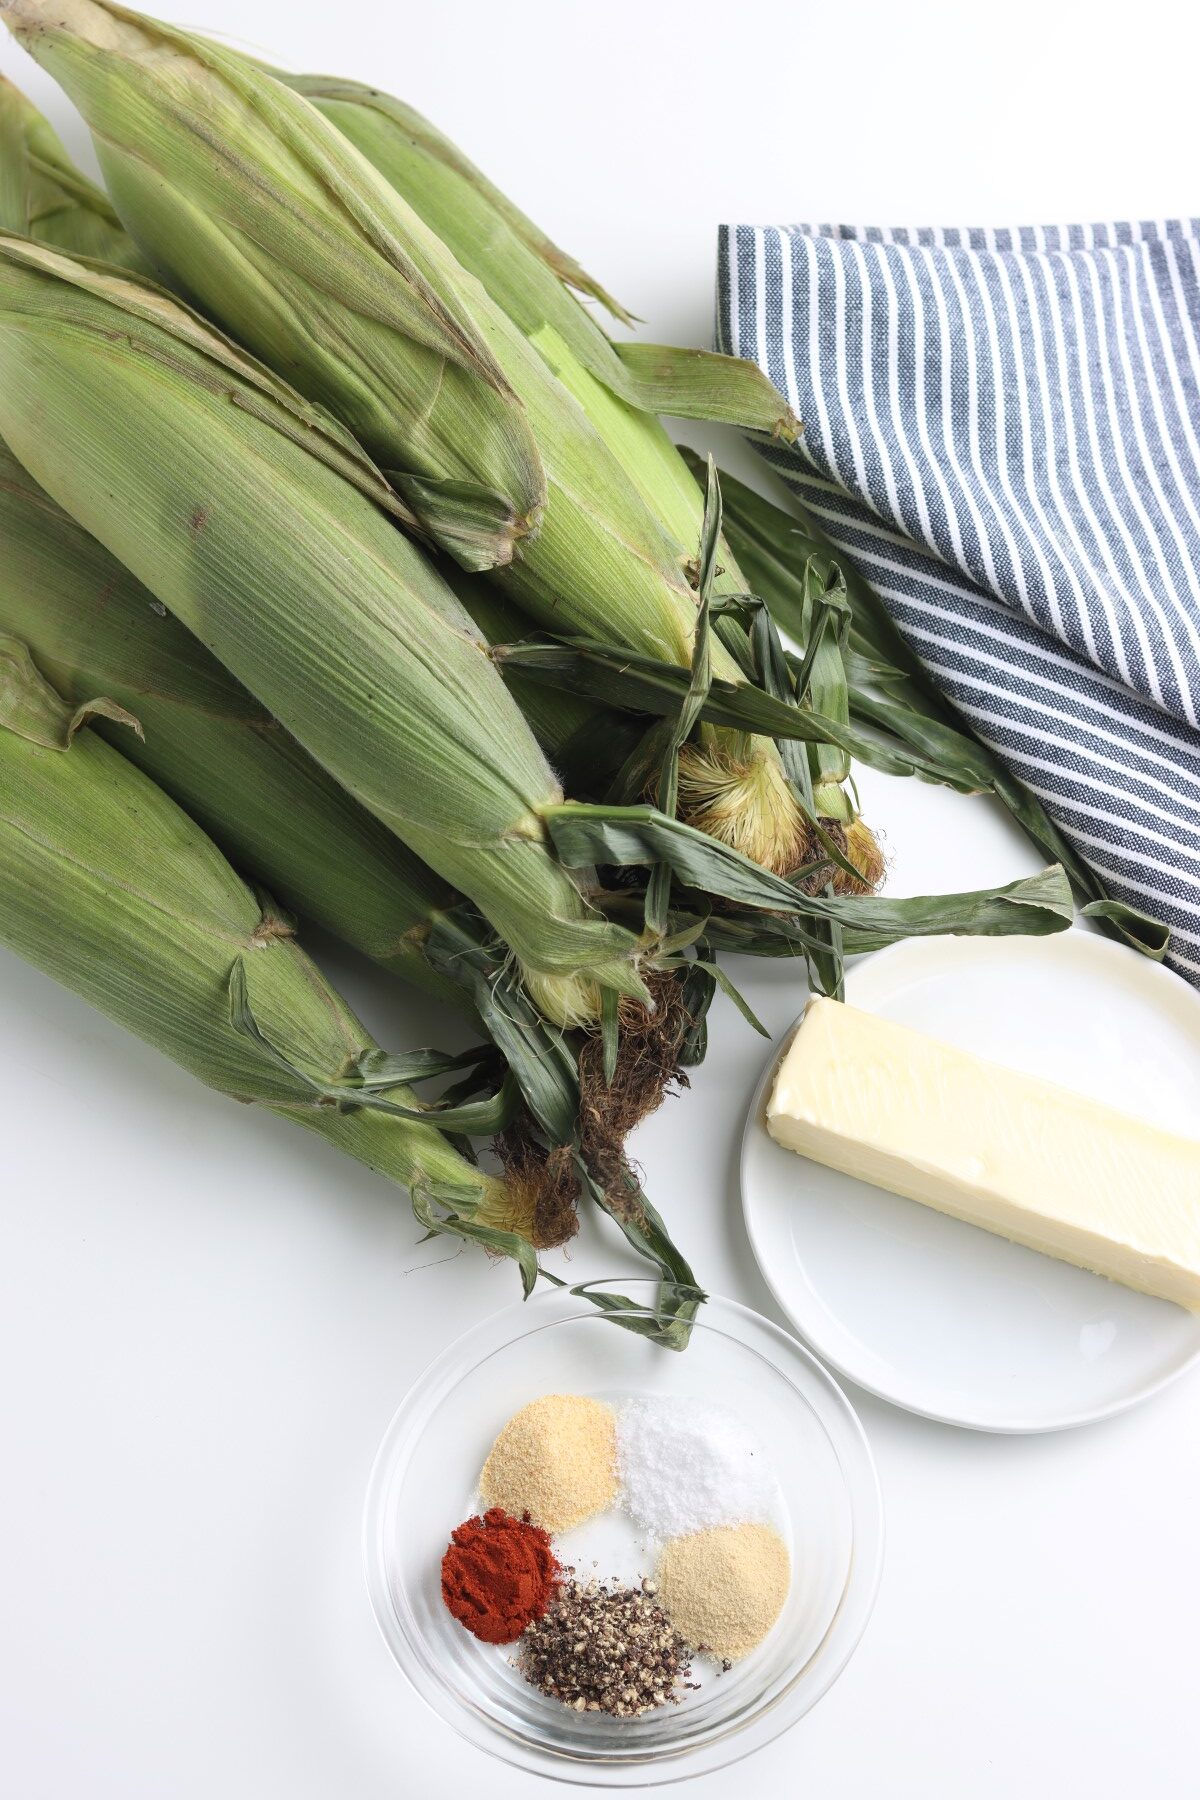 Ingedients to make smoked corn of the cob